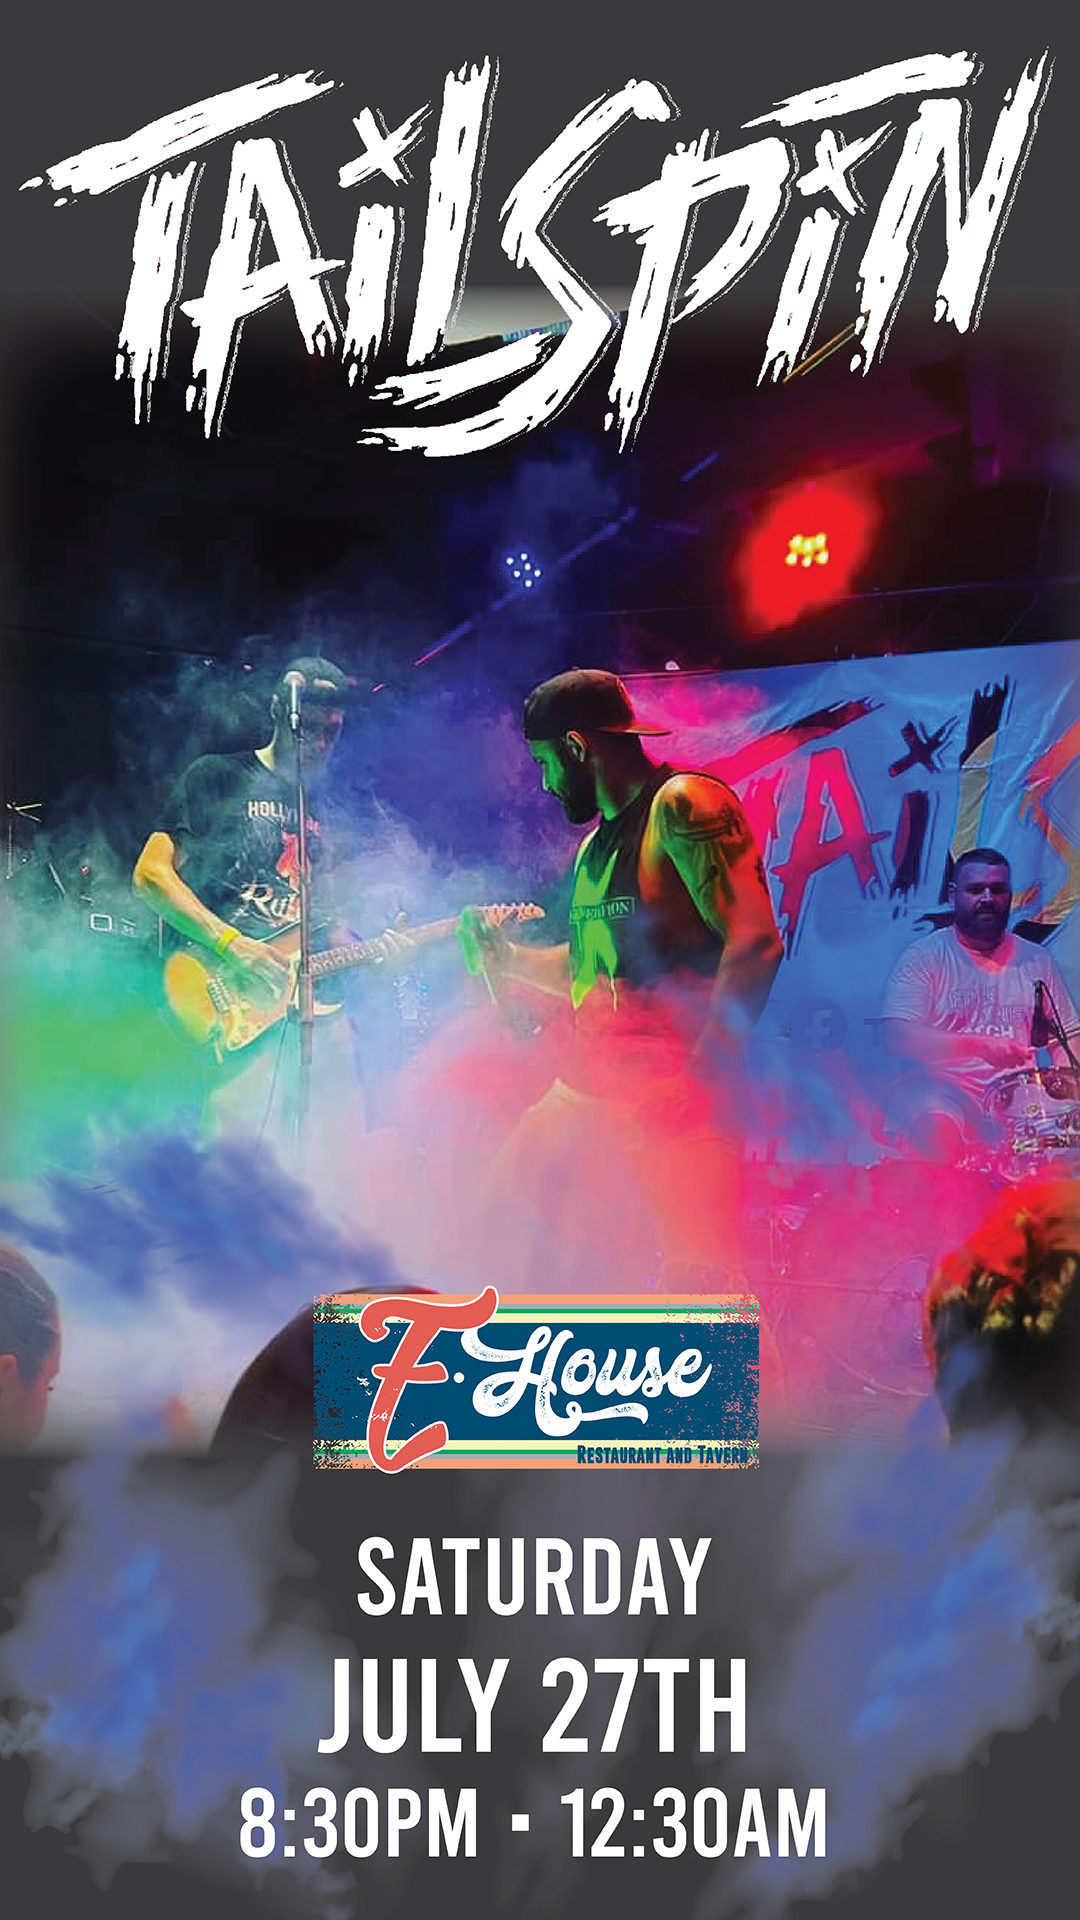 A band performs on stage amid colorful fog effects, with a banner reading "Tailspin." Text below details a performance at Z House on Saturday, July 27th, at 8:30 PM to 12:30 AM.